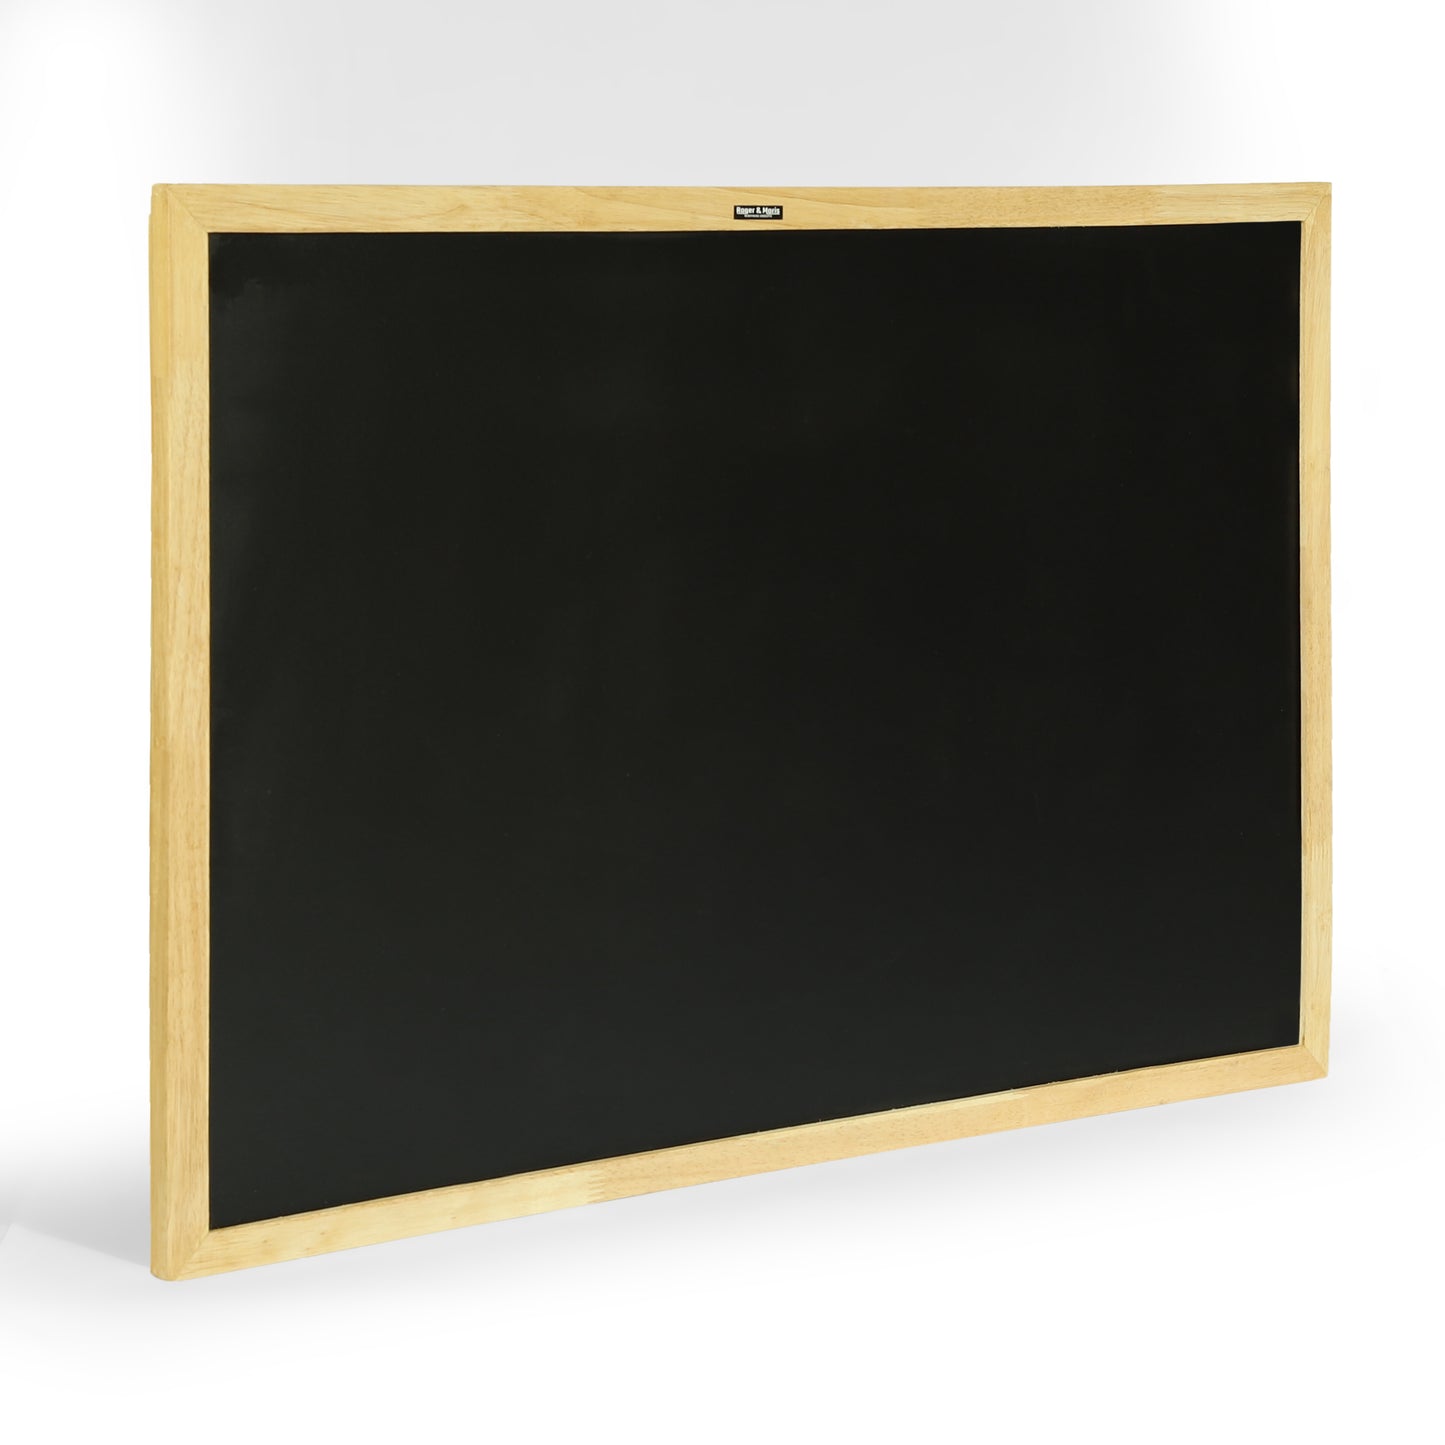 Roger & Moris Wooden (Rubber Wood) Framed Chalk Board - Non Magnetic, Lightweight for Home, Office and School (Black, Size : 1.5 feet x 2 feet)